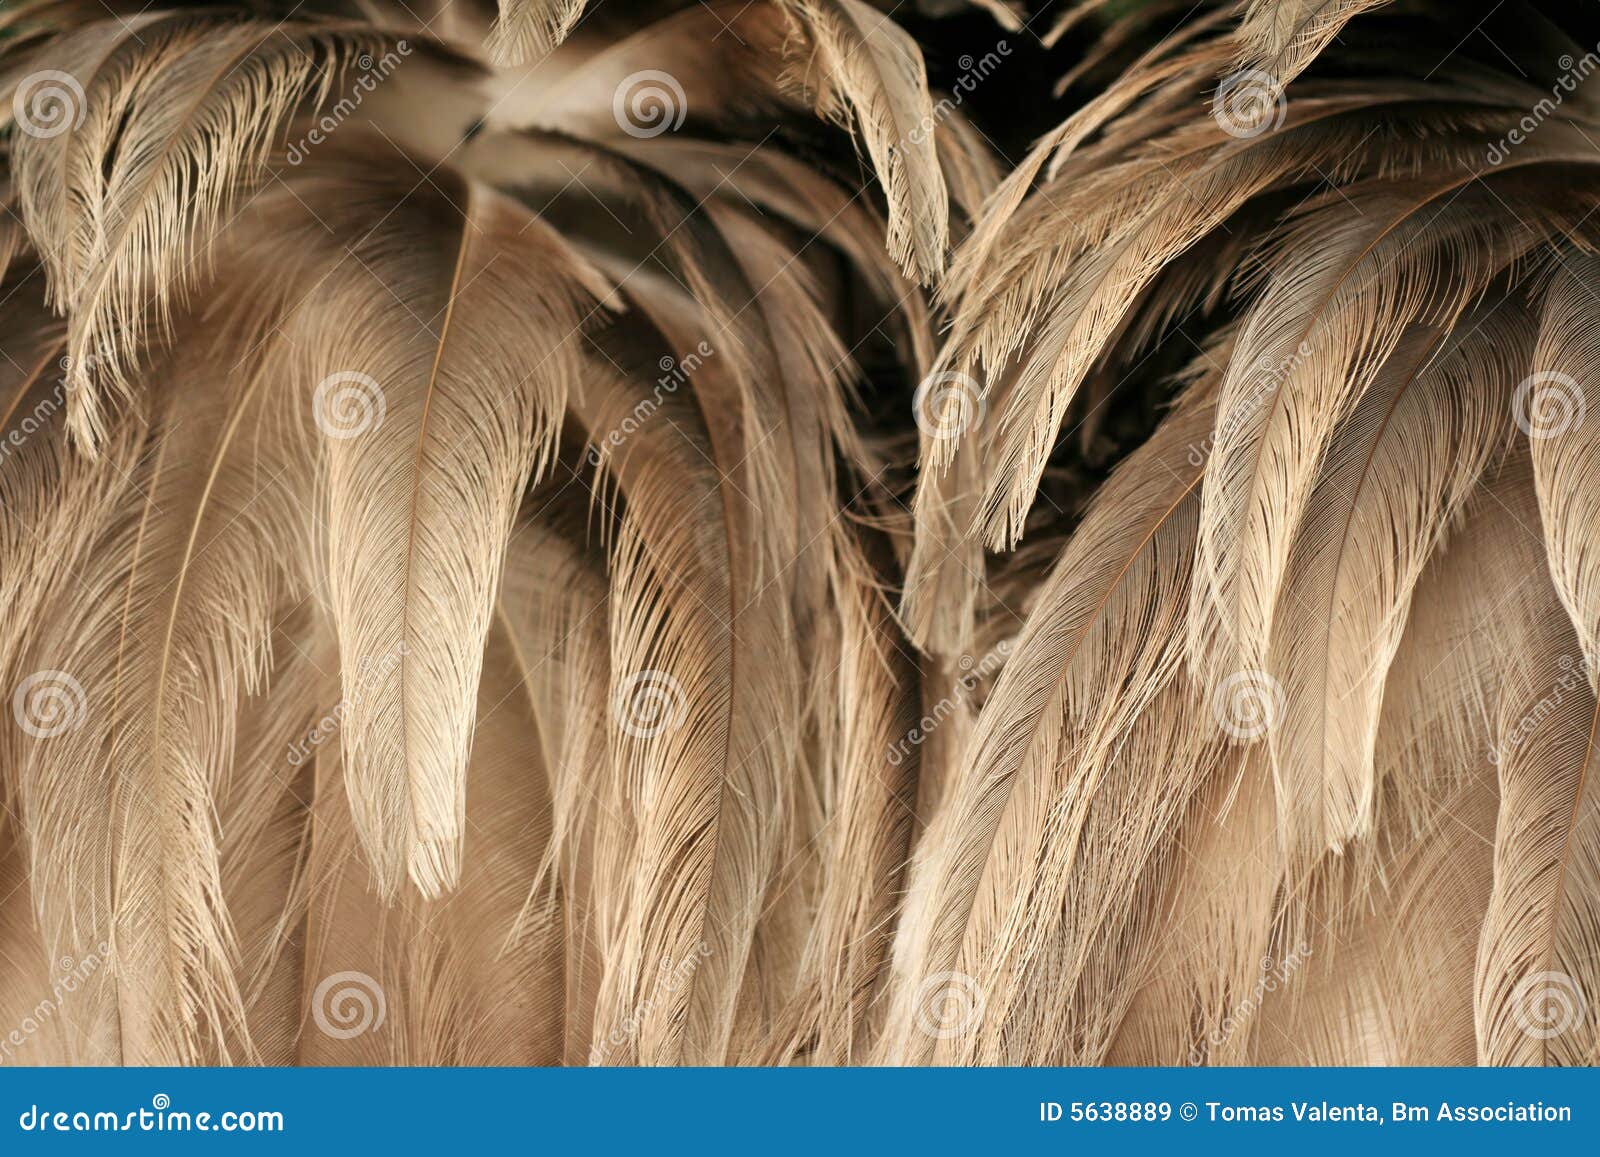 texture of ostrich plumage